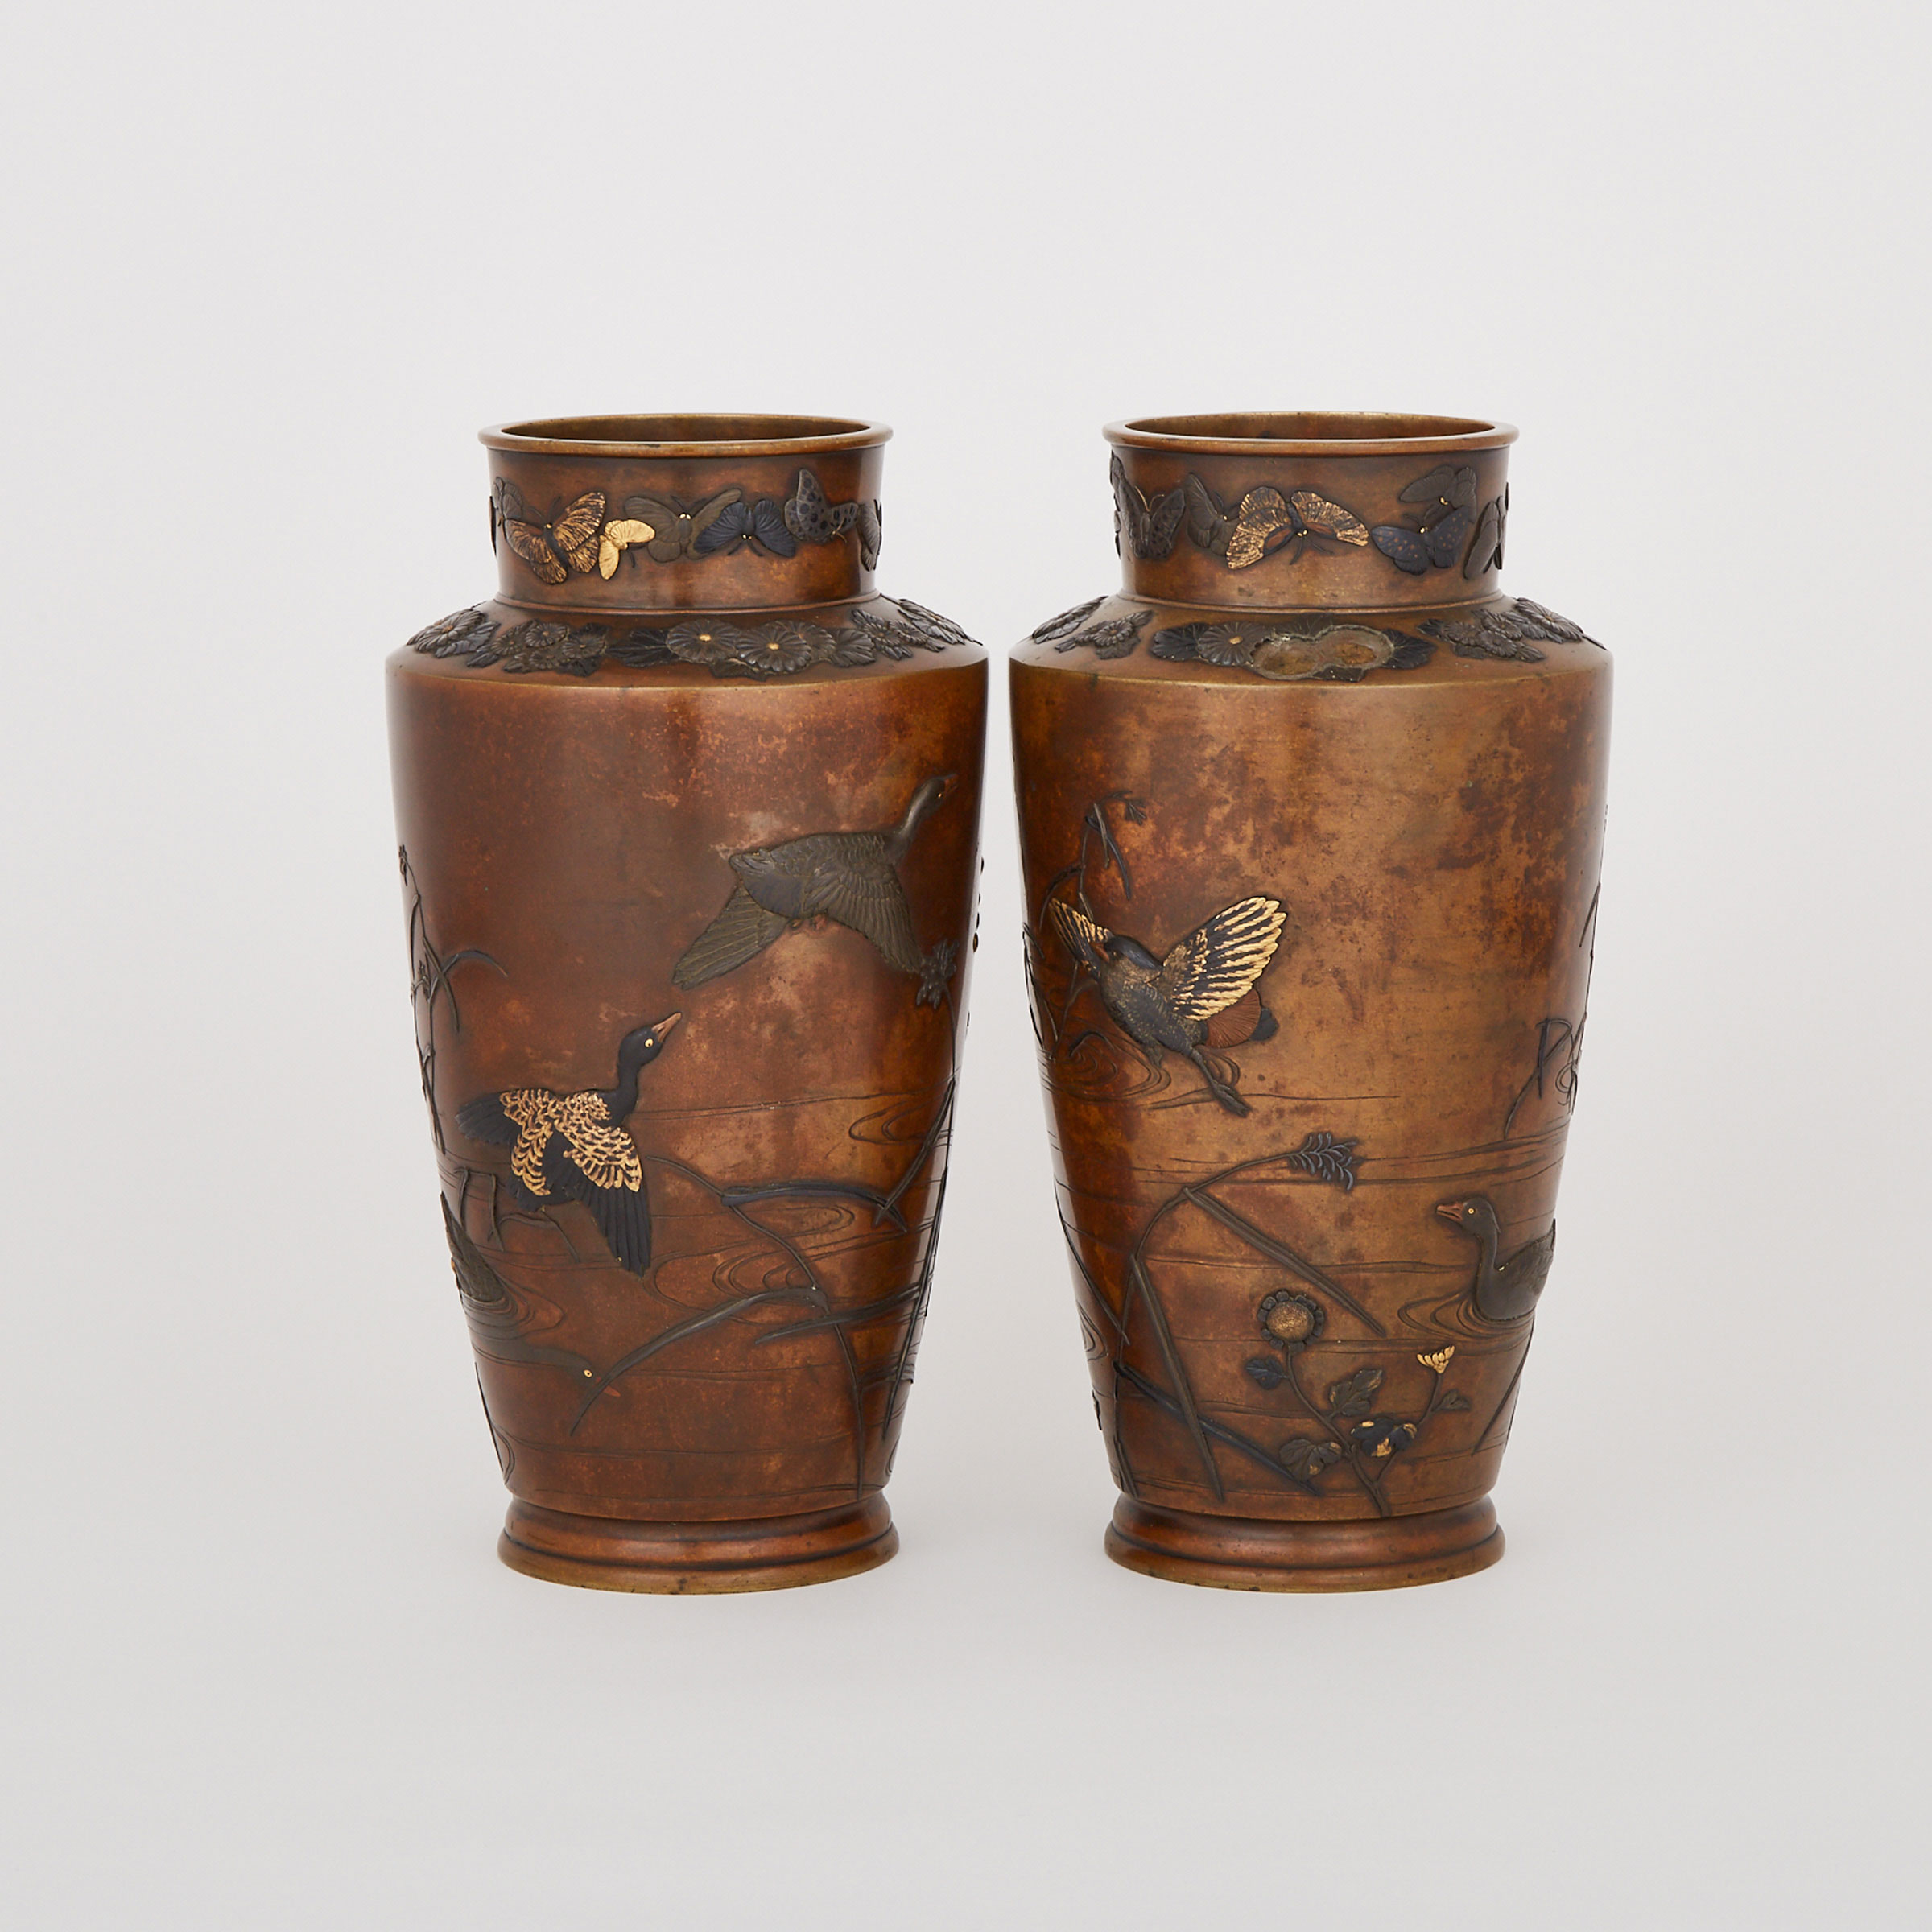 A Pair of Mixed-Metal Inlaid Bronze Vases, Meiji Period 